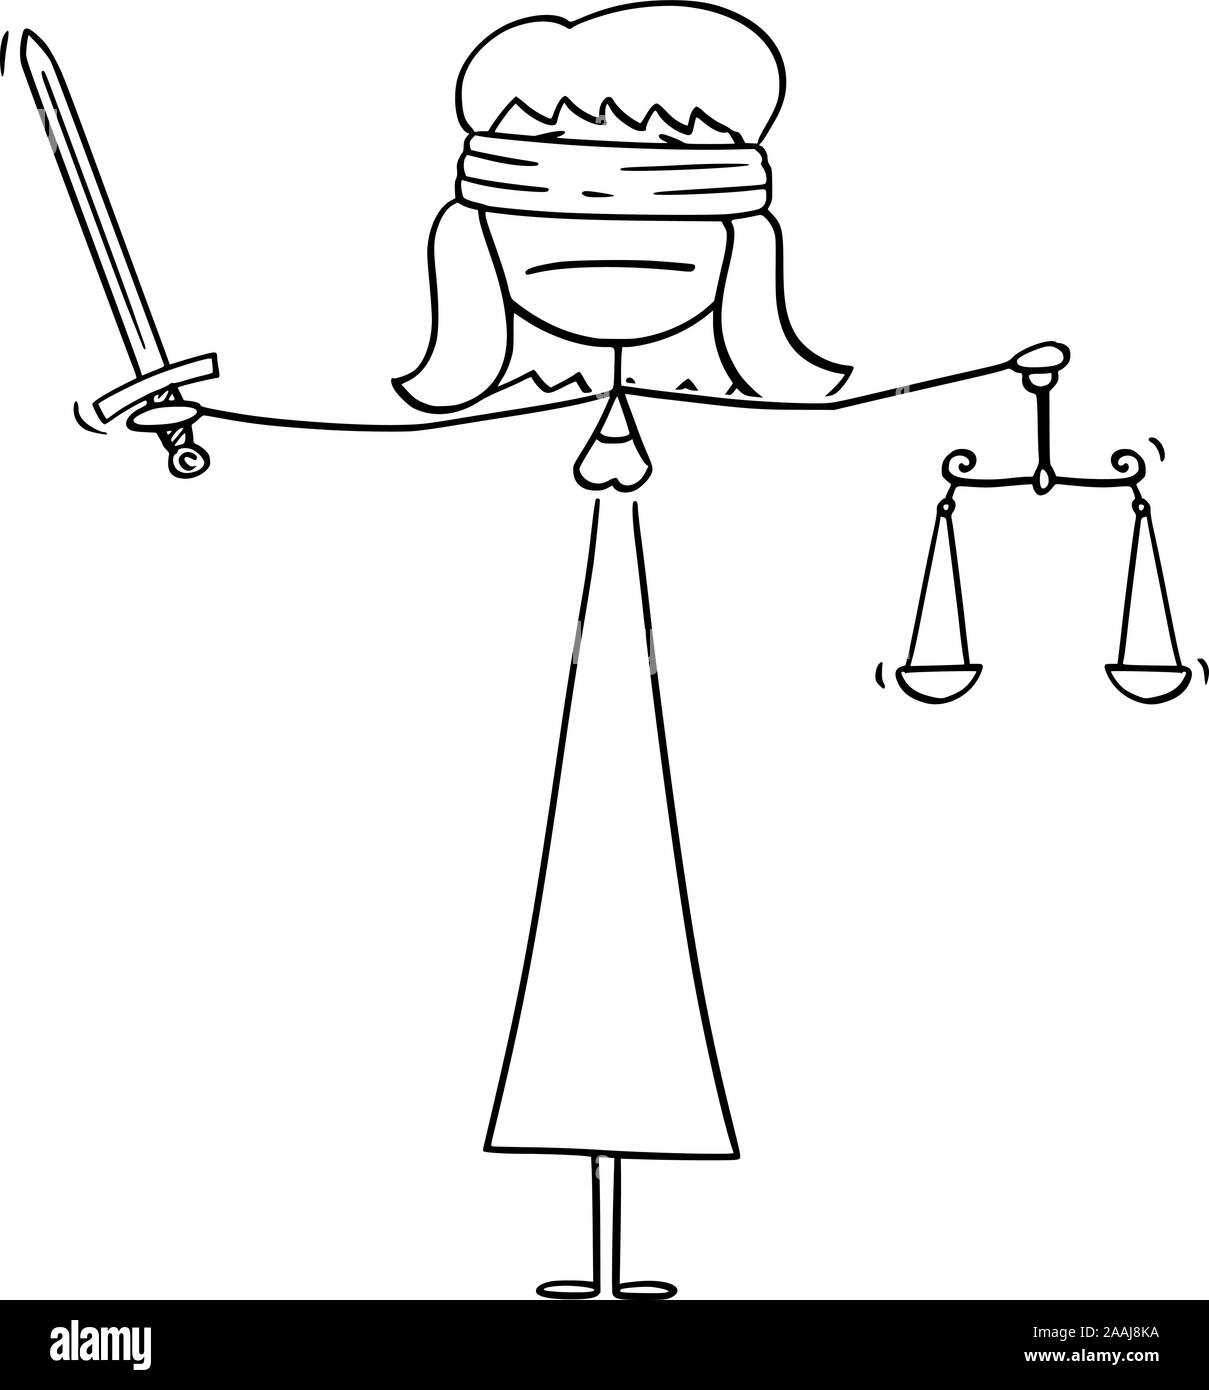 Vector cartoon stick figure drawing conceptual illustration of madam or lady justice blindfolded woman holding sword and balance scales. Allegorical personification of moral force in judicial system. Stock Vector